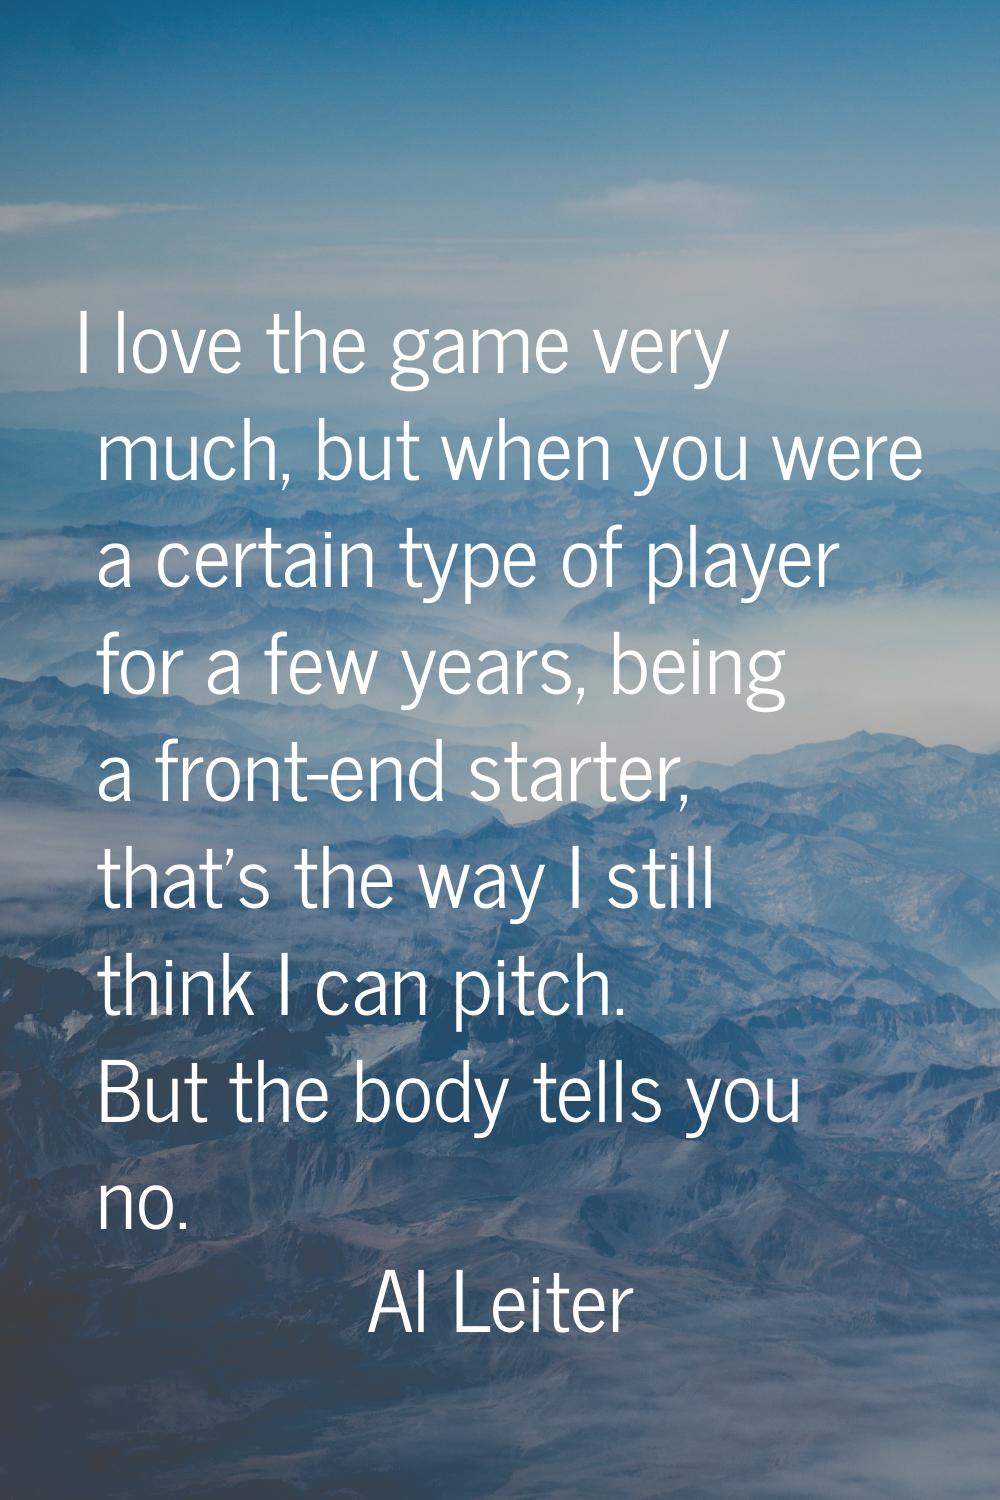 I love the game very much, but when you were a certain type of player for a few years, being a fron